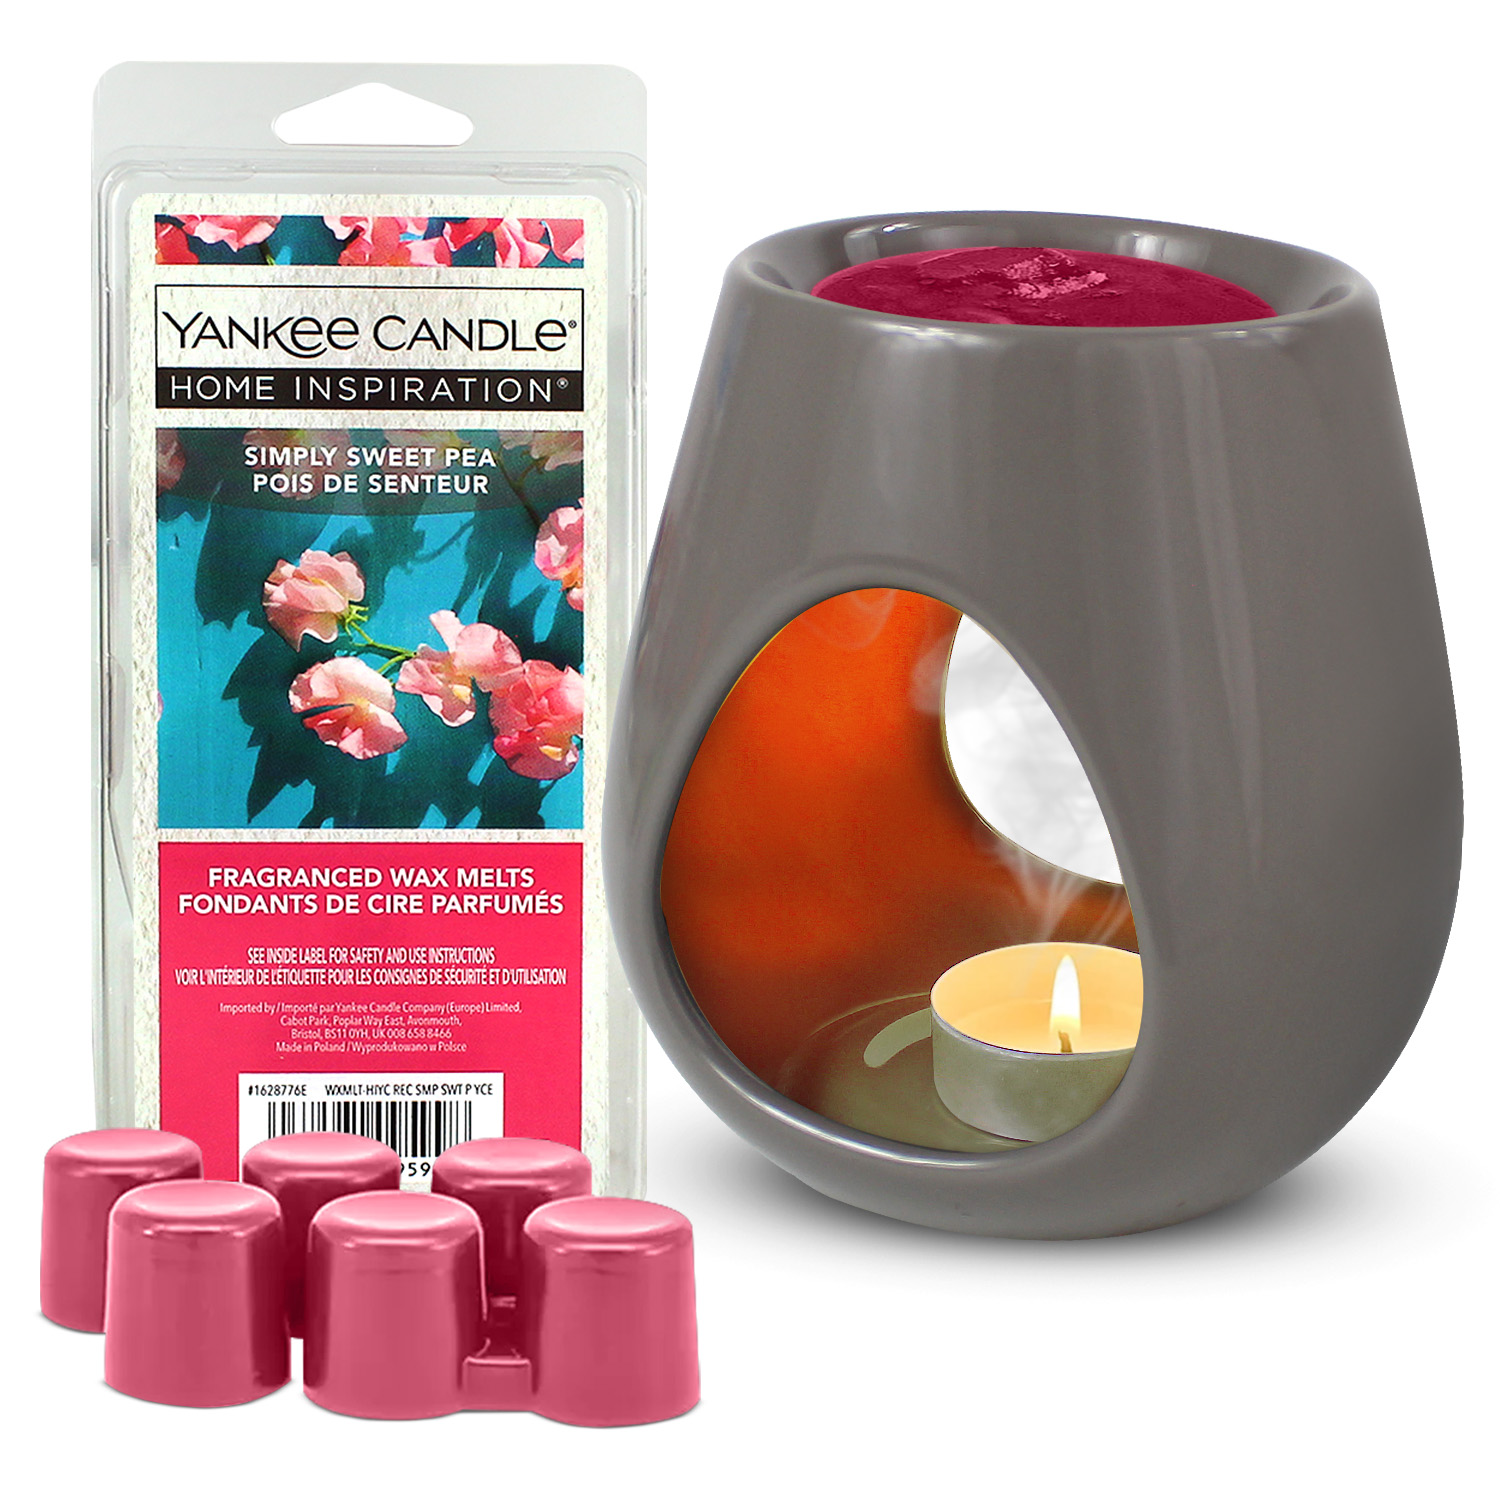 Yankee Candle Home Inspiration Wax Melt Ceramic Warmer Kit - Simply Sweet  Pea - WeeklyDeals4Less